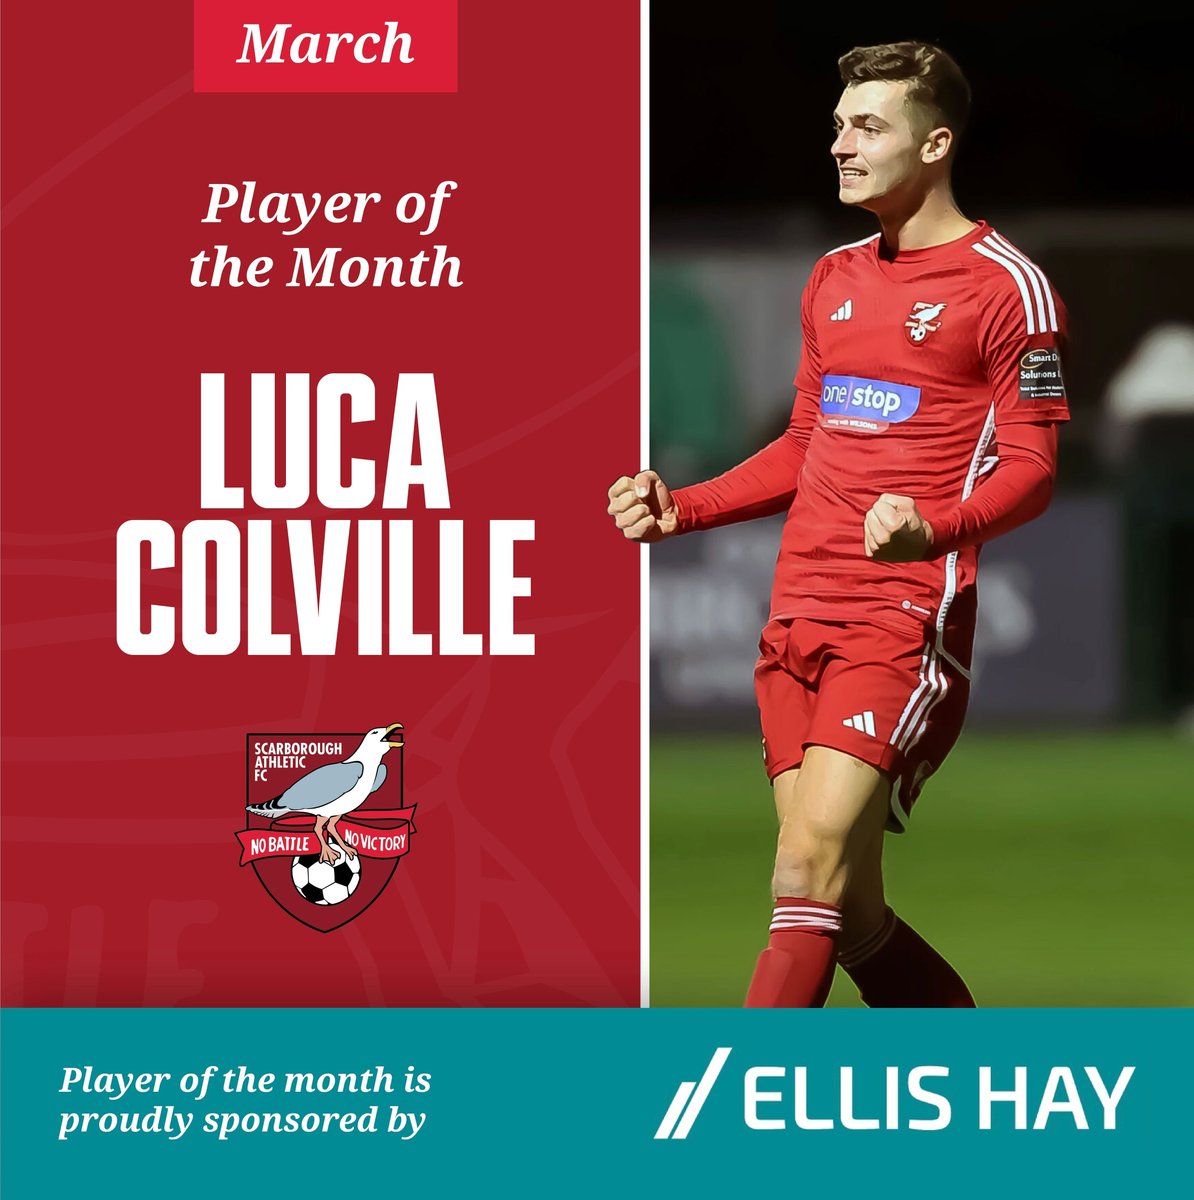 Your March Player of the Month | Luca Colville 🎉

The Wizard sweeps up! Thank you to the hundreds who voted. 

Player of the Month is sponsored by @EllisHayScarb

@LucaColville is sponsored by: 
Home- Slurping Seadogs
Away- Steve Smith